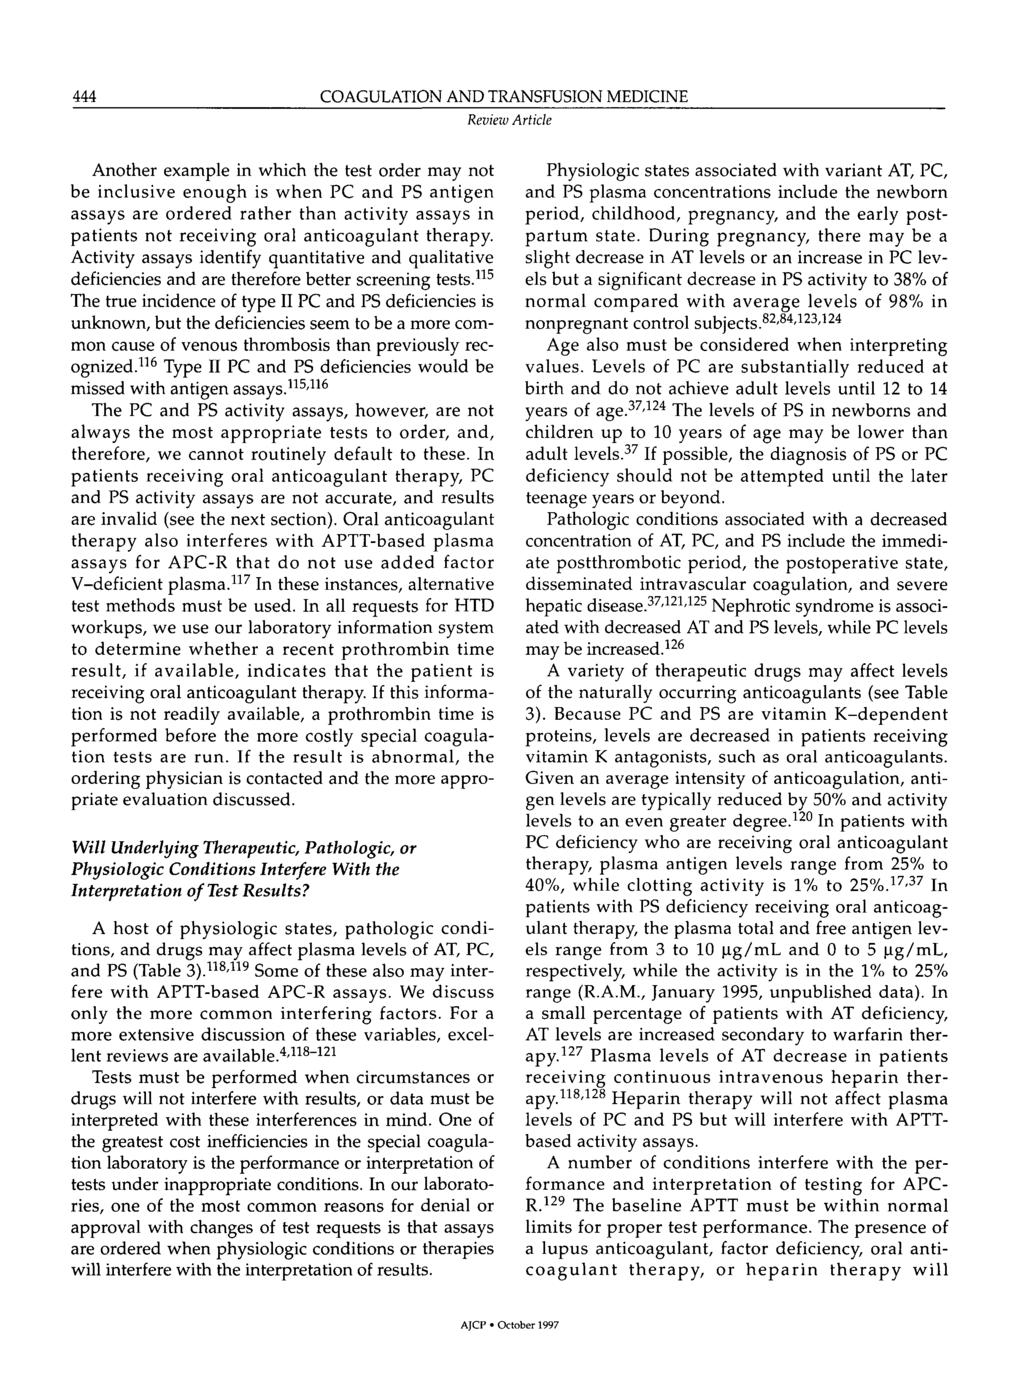 444 COAGULATION AN TRANSFUSION MEICINE Revieiv Article Another example in which the test order may not be inclusive enough is when PC and PS antigen assays are ordered rather than activity assays in